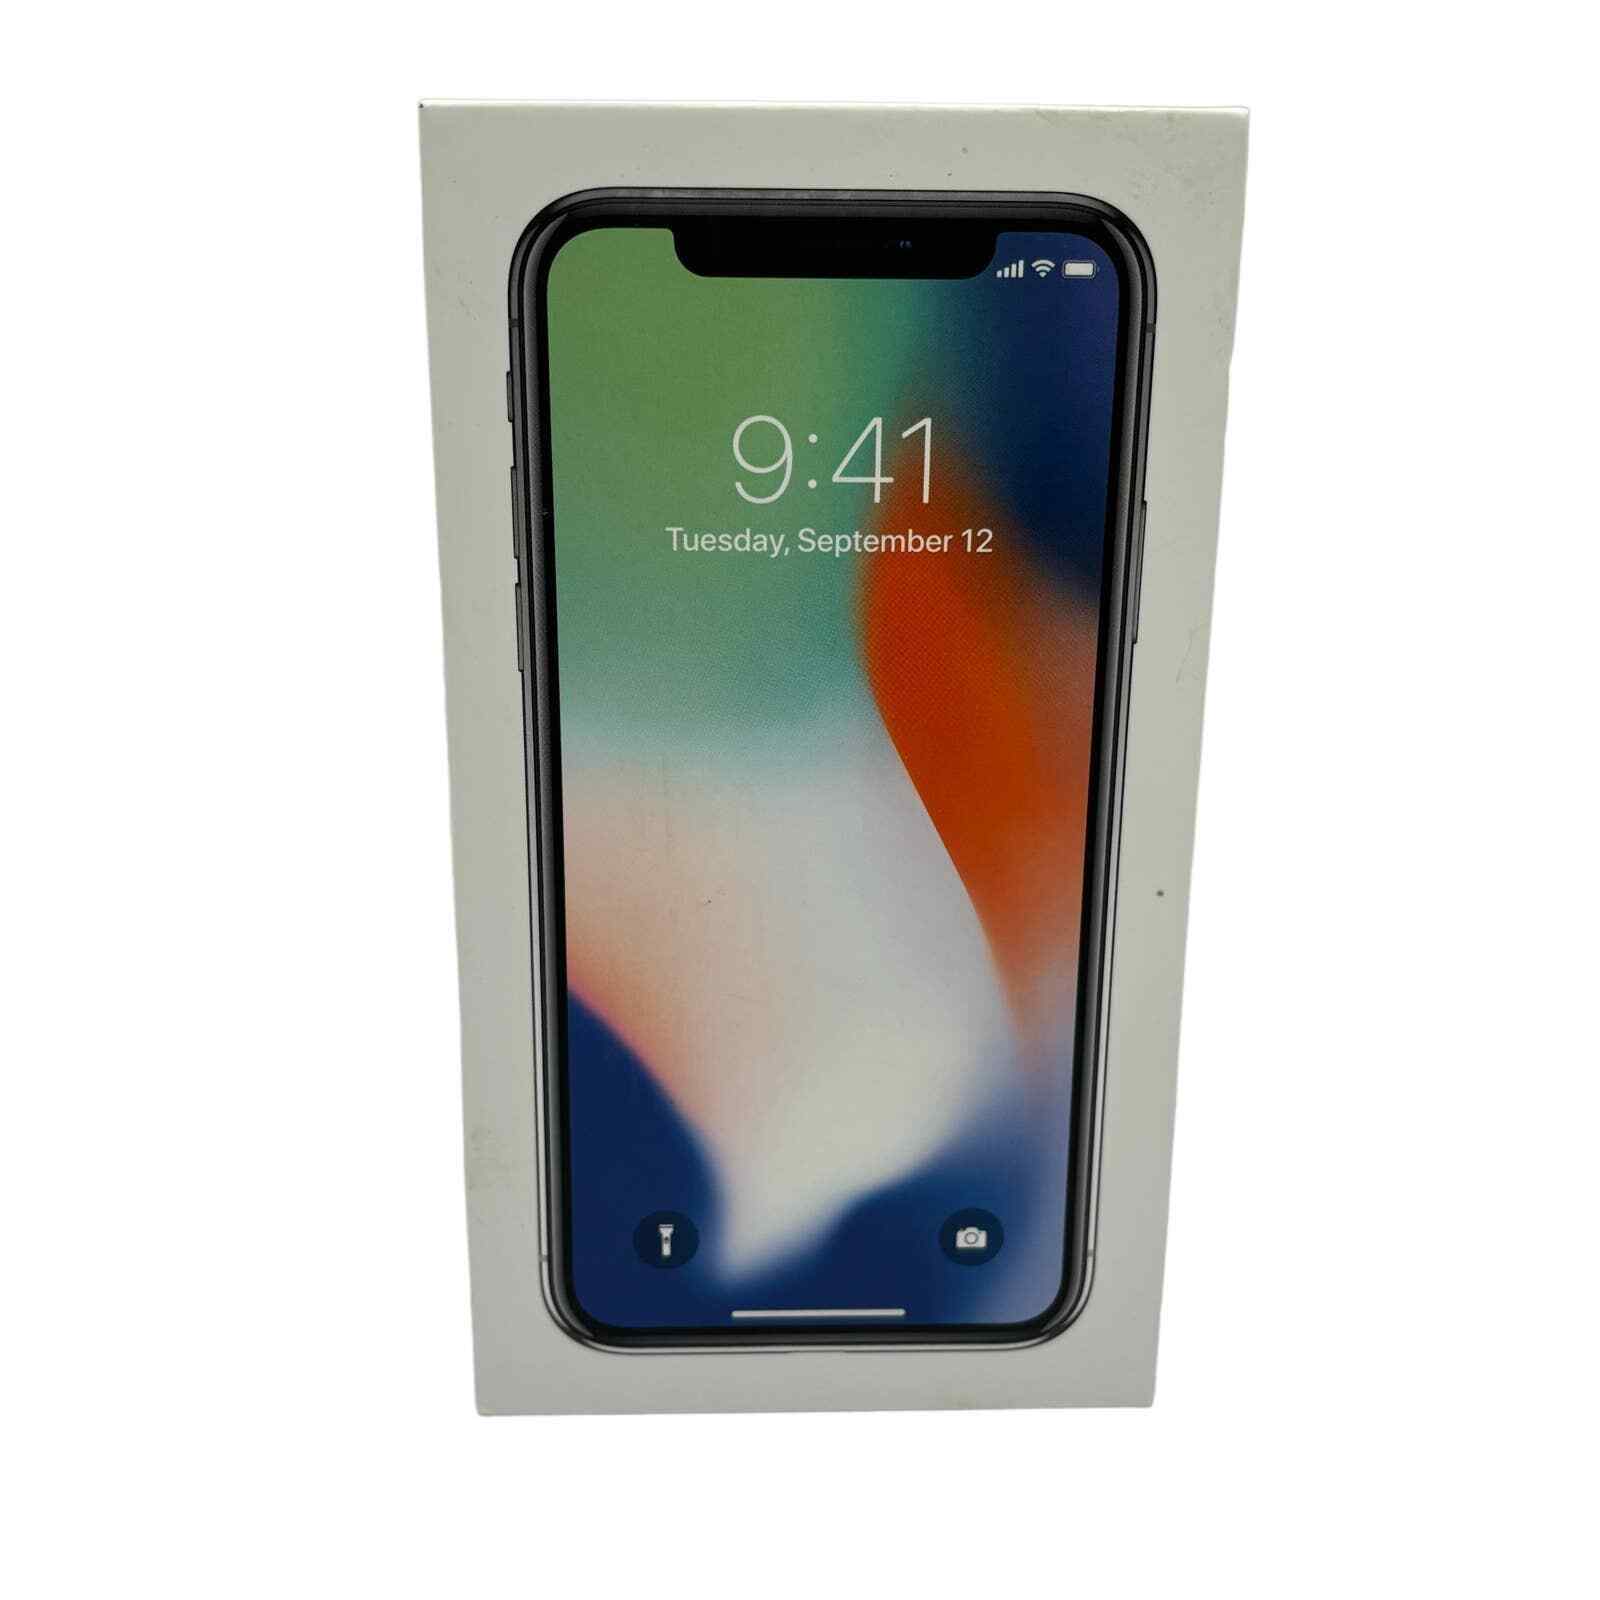 Apple iPhone X Silver 64Gb EMPTY BOX ONLY